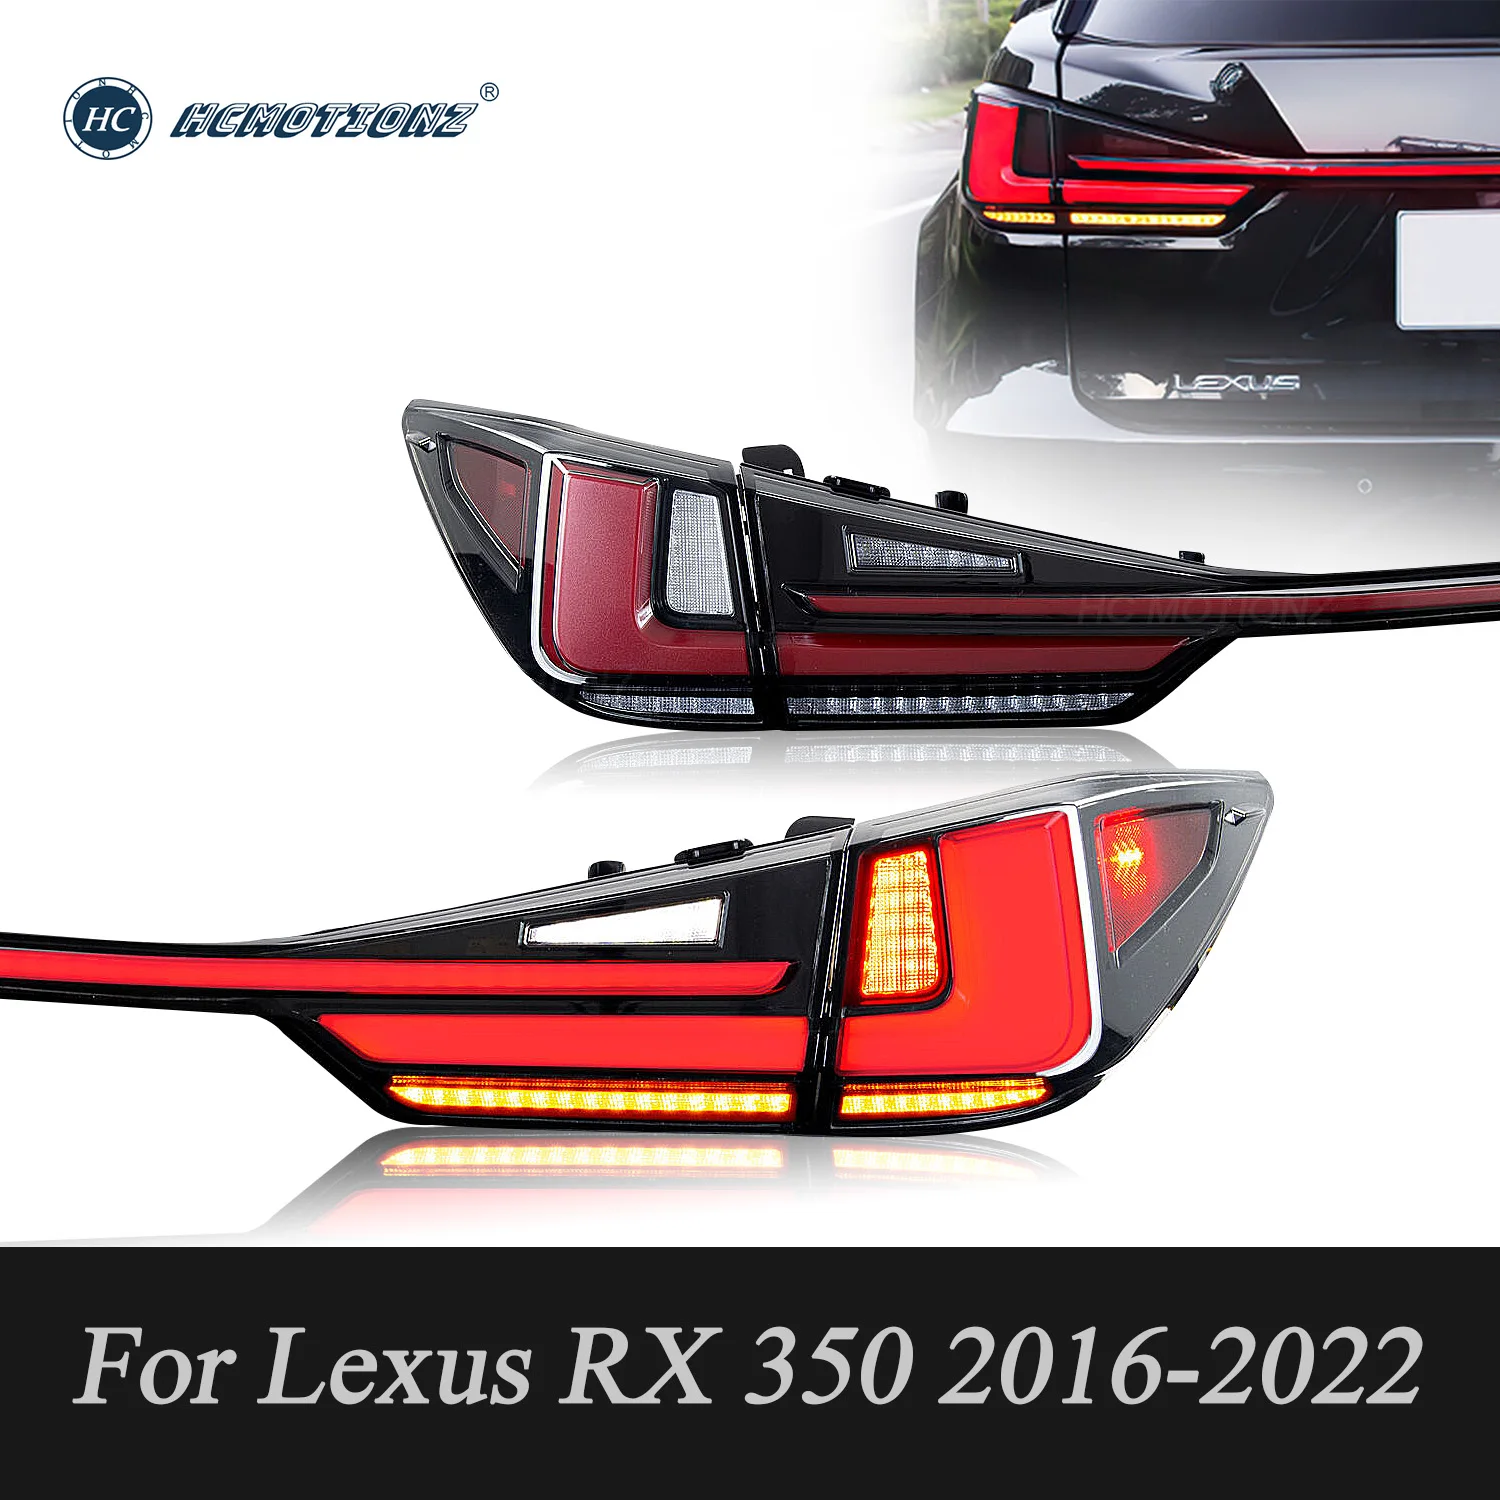 HCMOTIONZ LED Tail Lights for Lexus RX 350 L RX 450h F 2016 2017 2018 2019 2020 2021 2022 Car Styling Rear Lamps Assembly